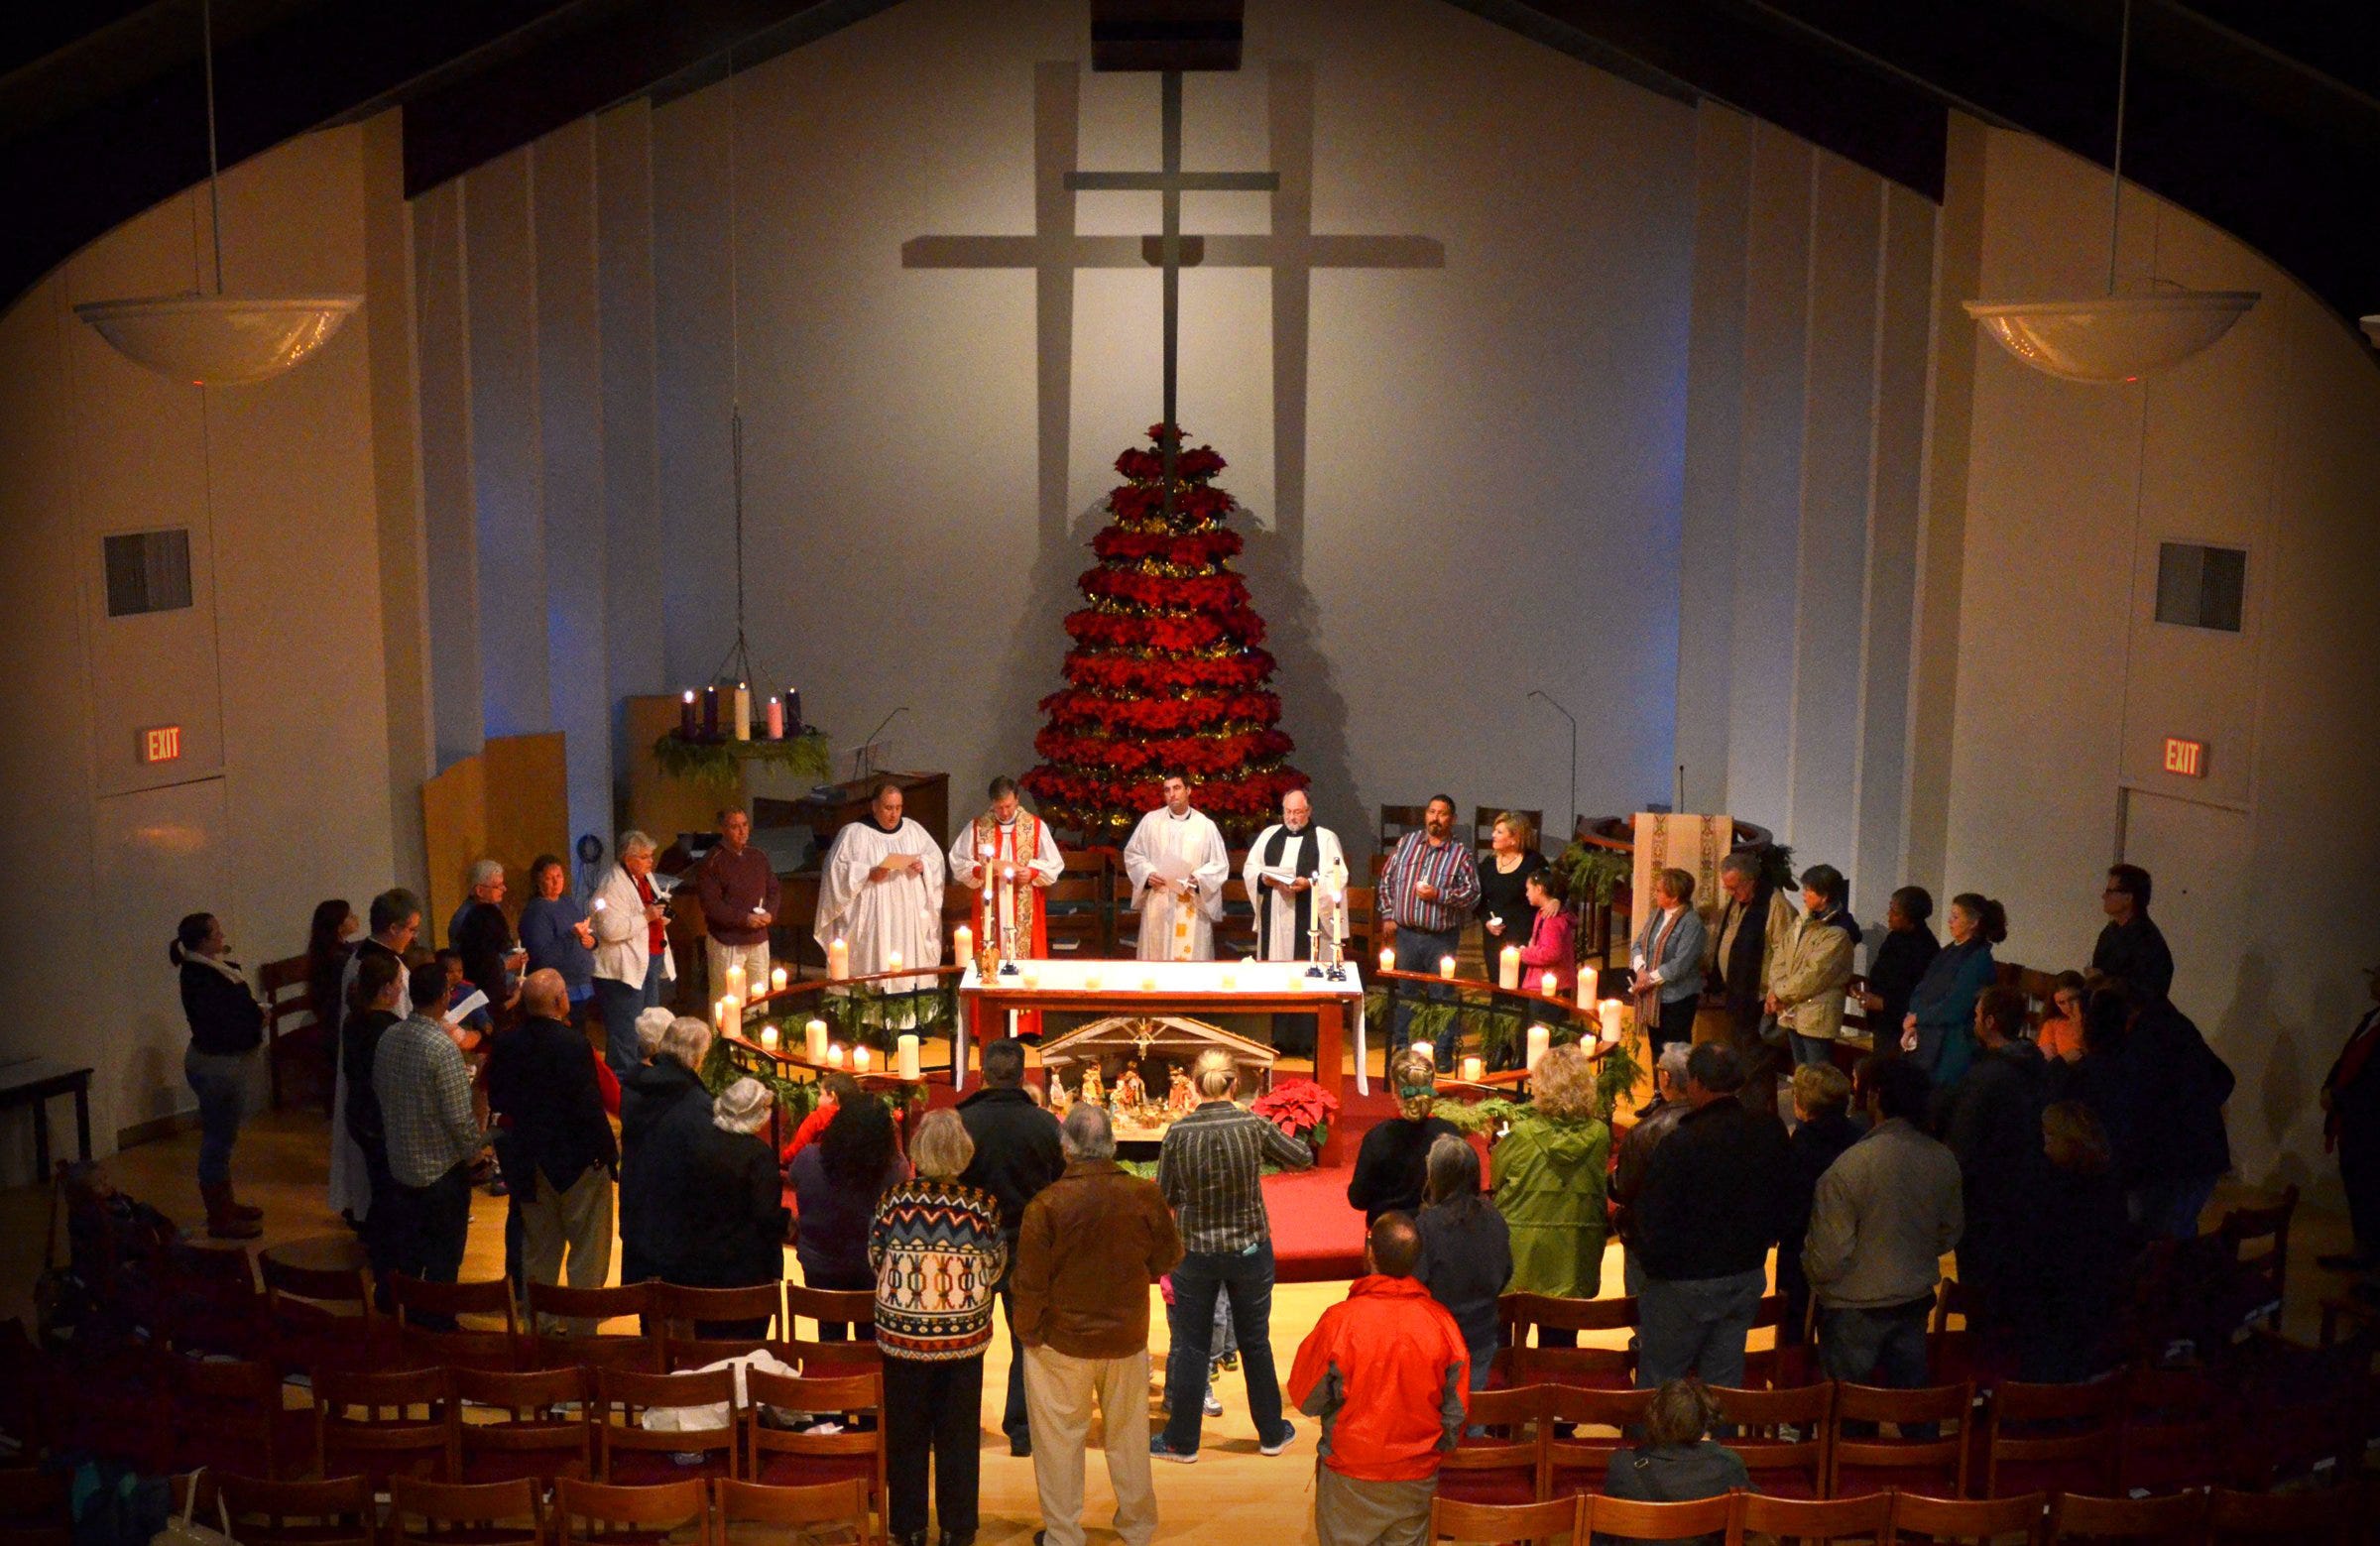 2019 Christmas Eve and Christmas Day church services in Corpus Christi